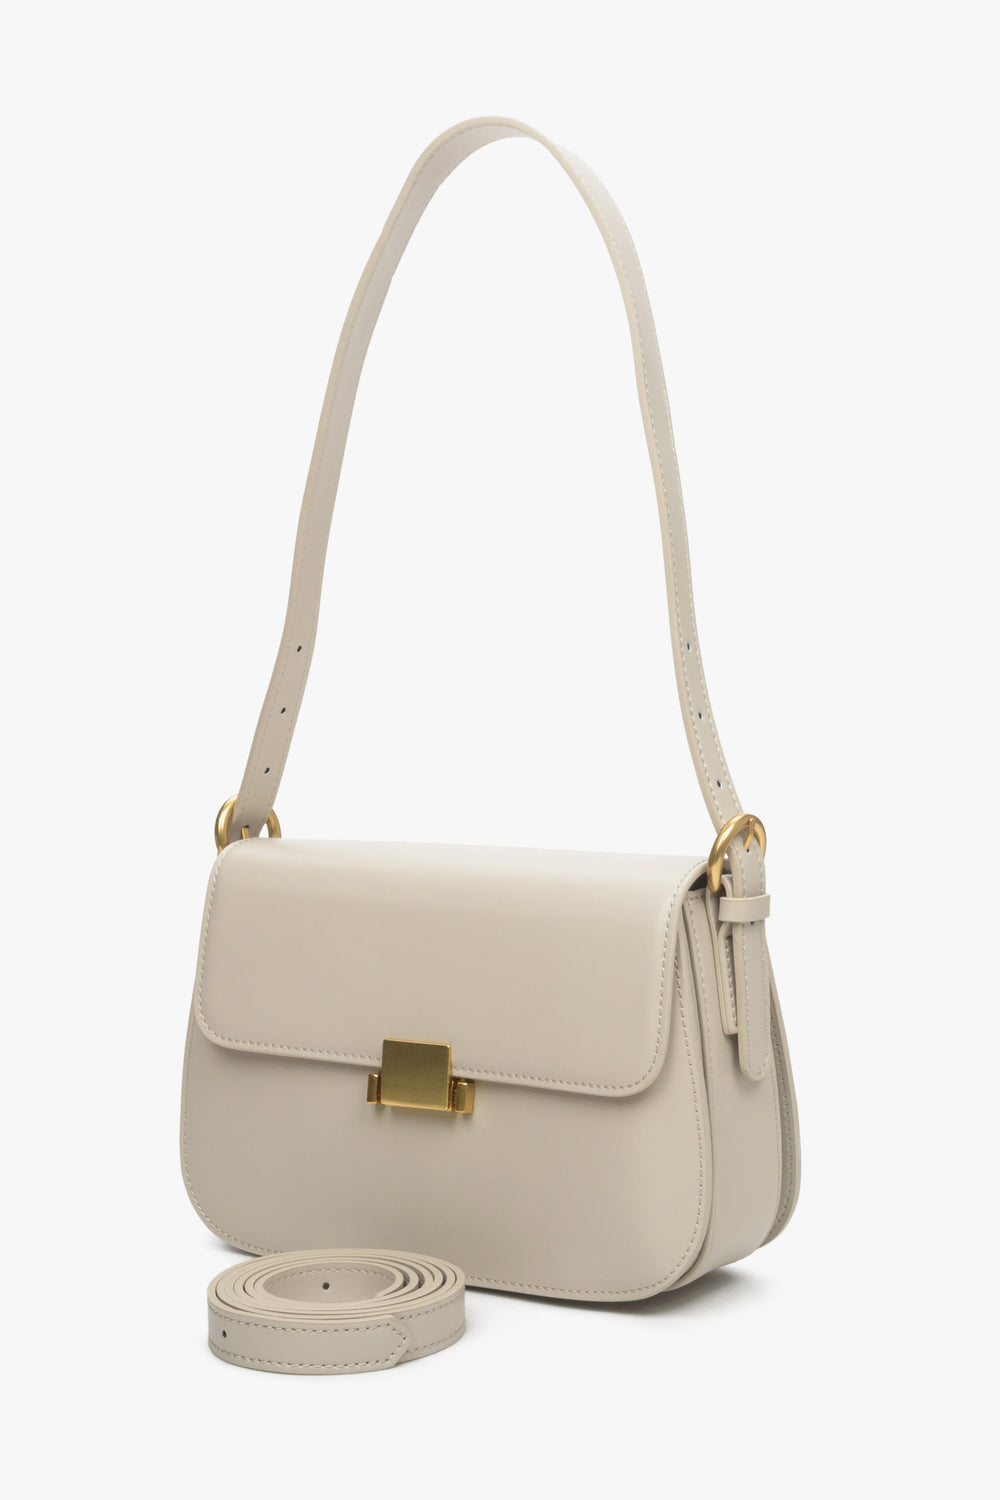 Women's light beige handbag made of genuine leather with gold accents by Estro.